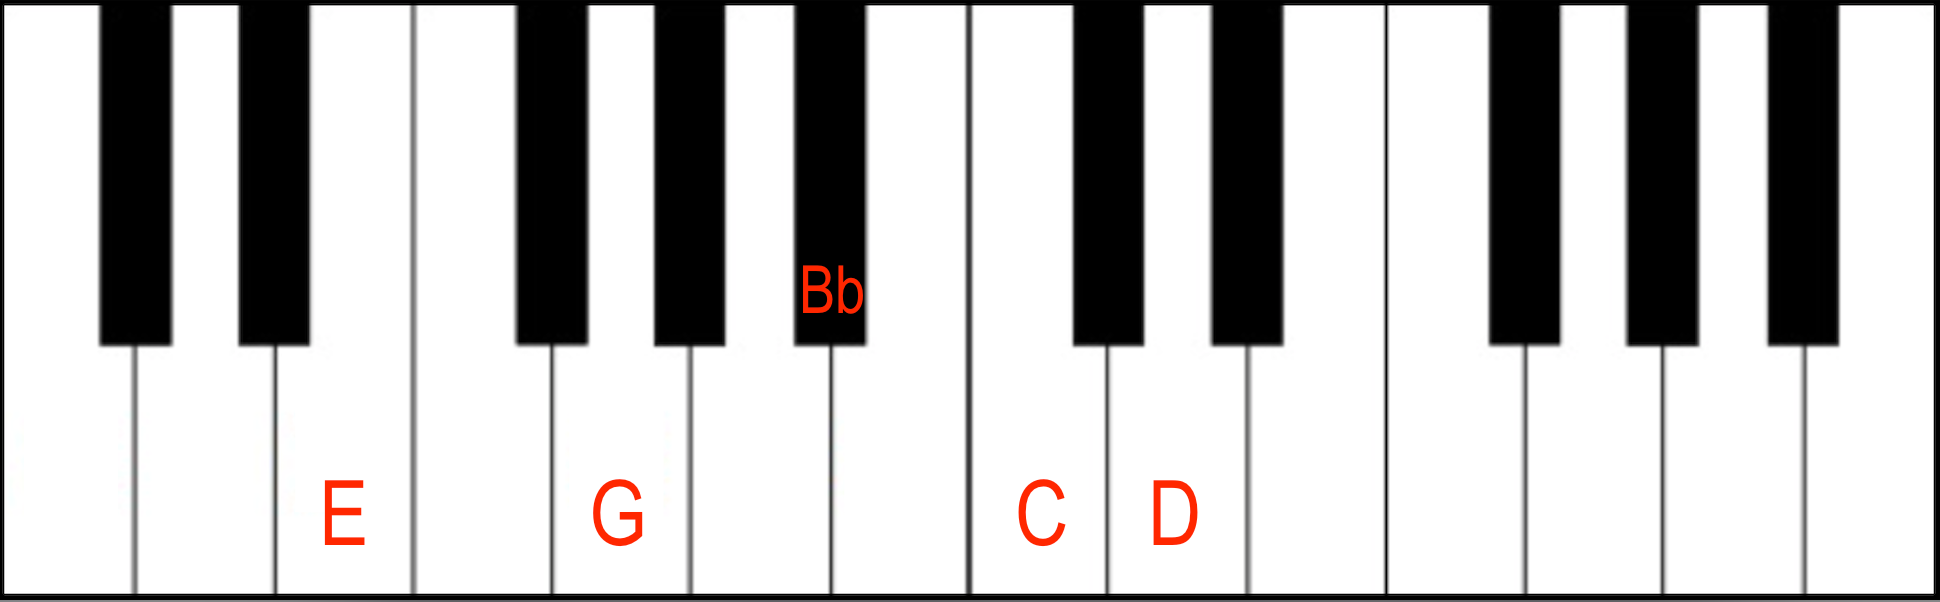 C9 Chord in 1st Inversion